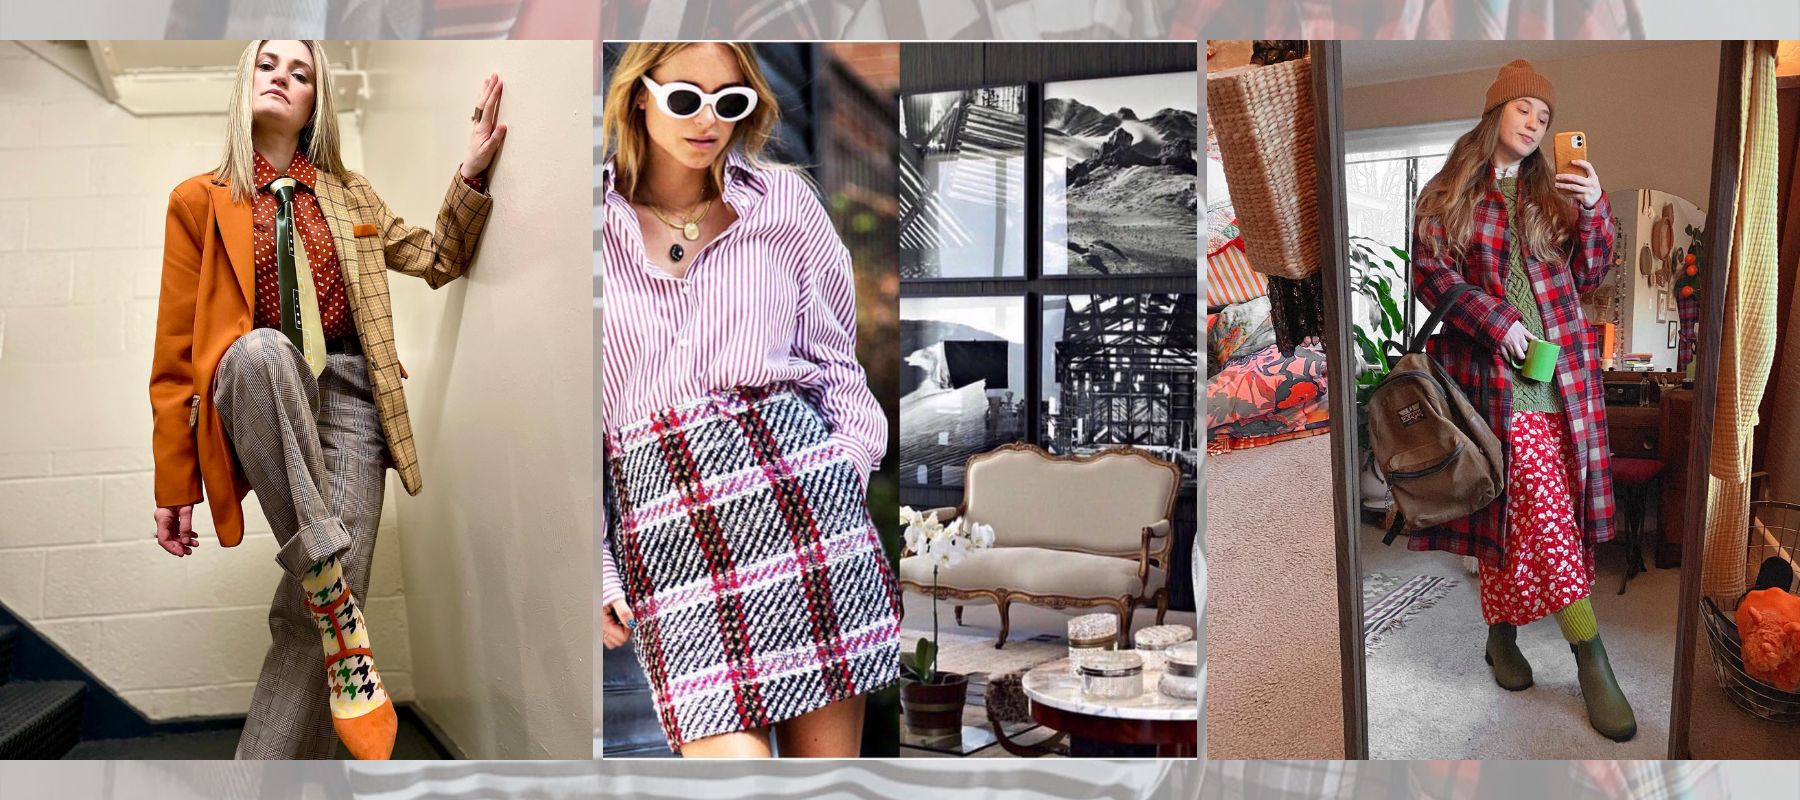 Plaid and Stripes: A Grunge-Flavored Preppy Look for Maximum Style